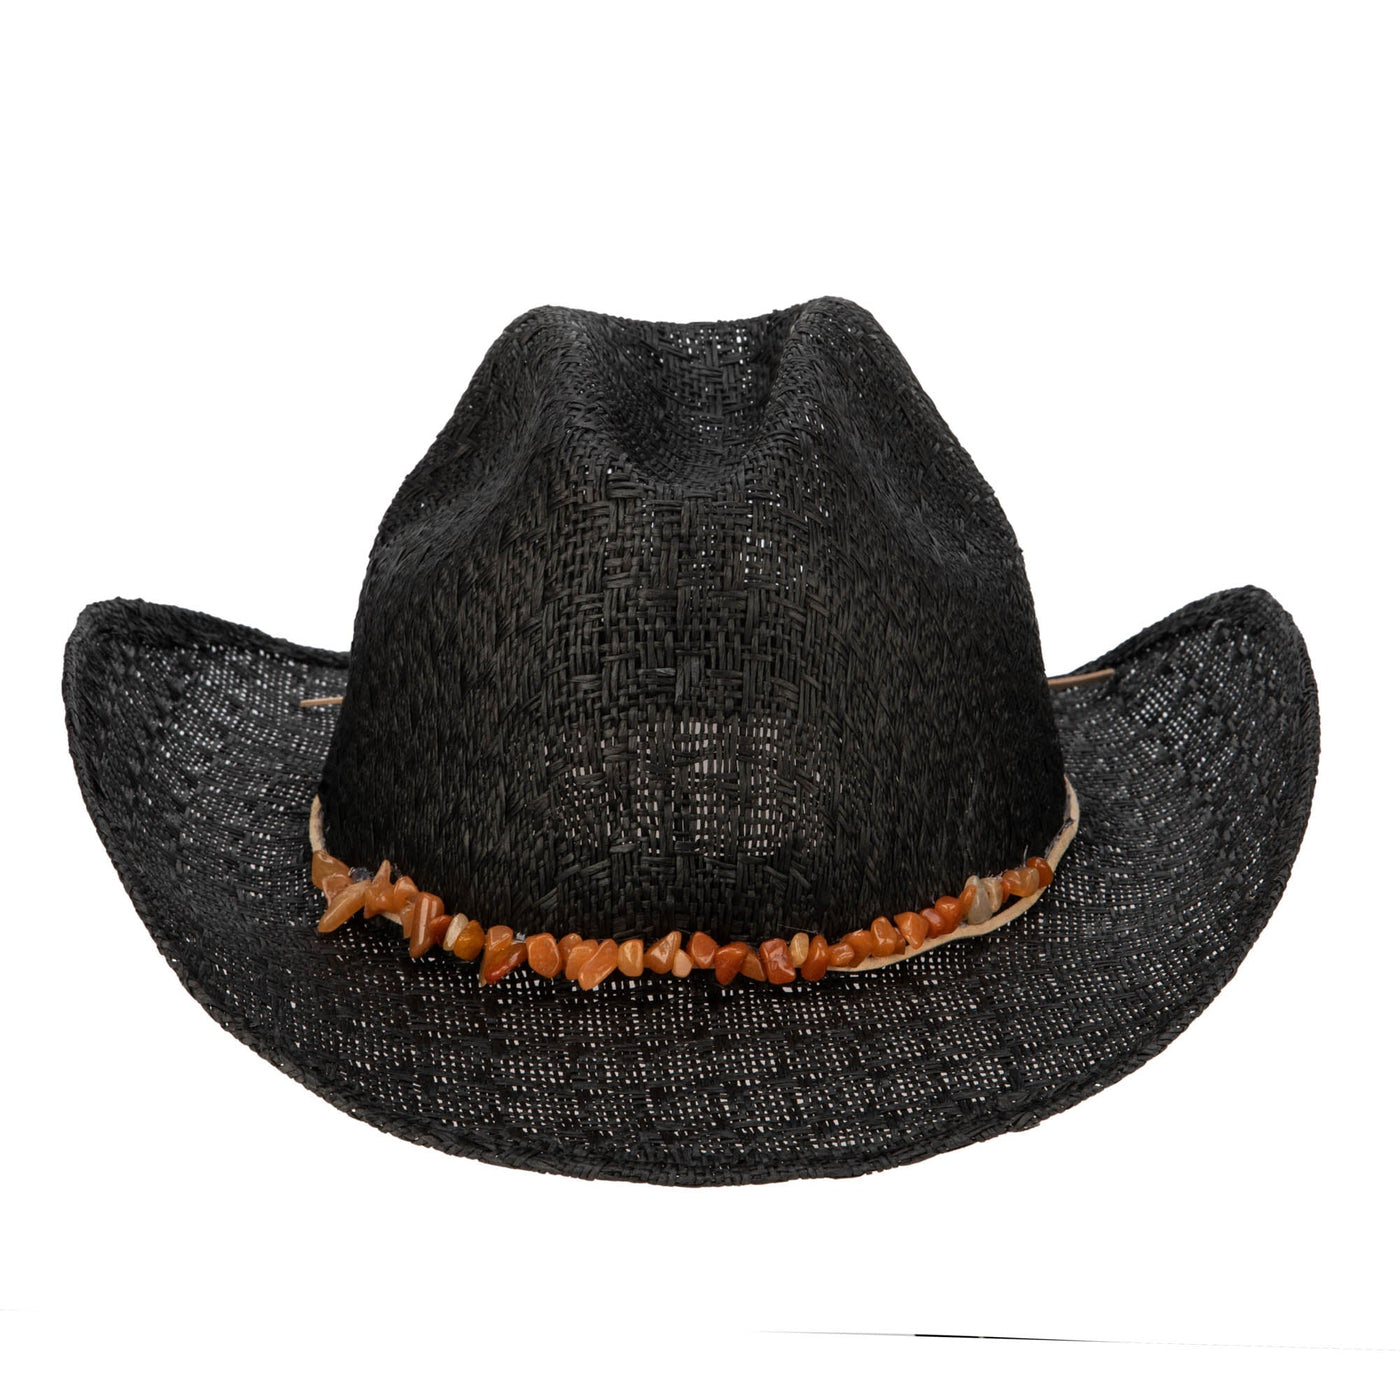 COWBOY - Women's Paperbraid Cowboy With Layered Bands